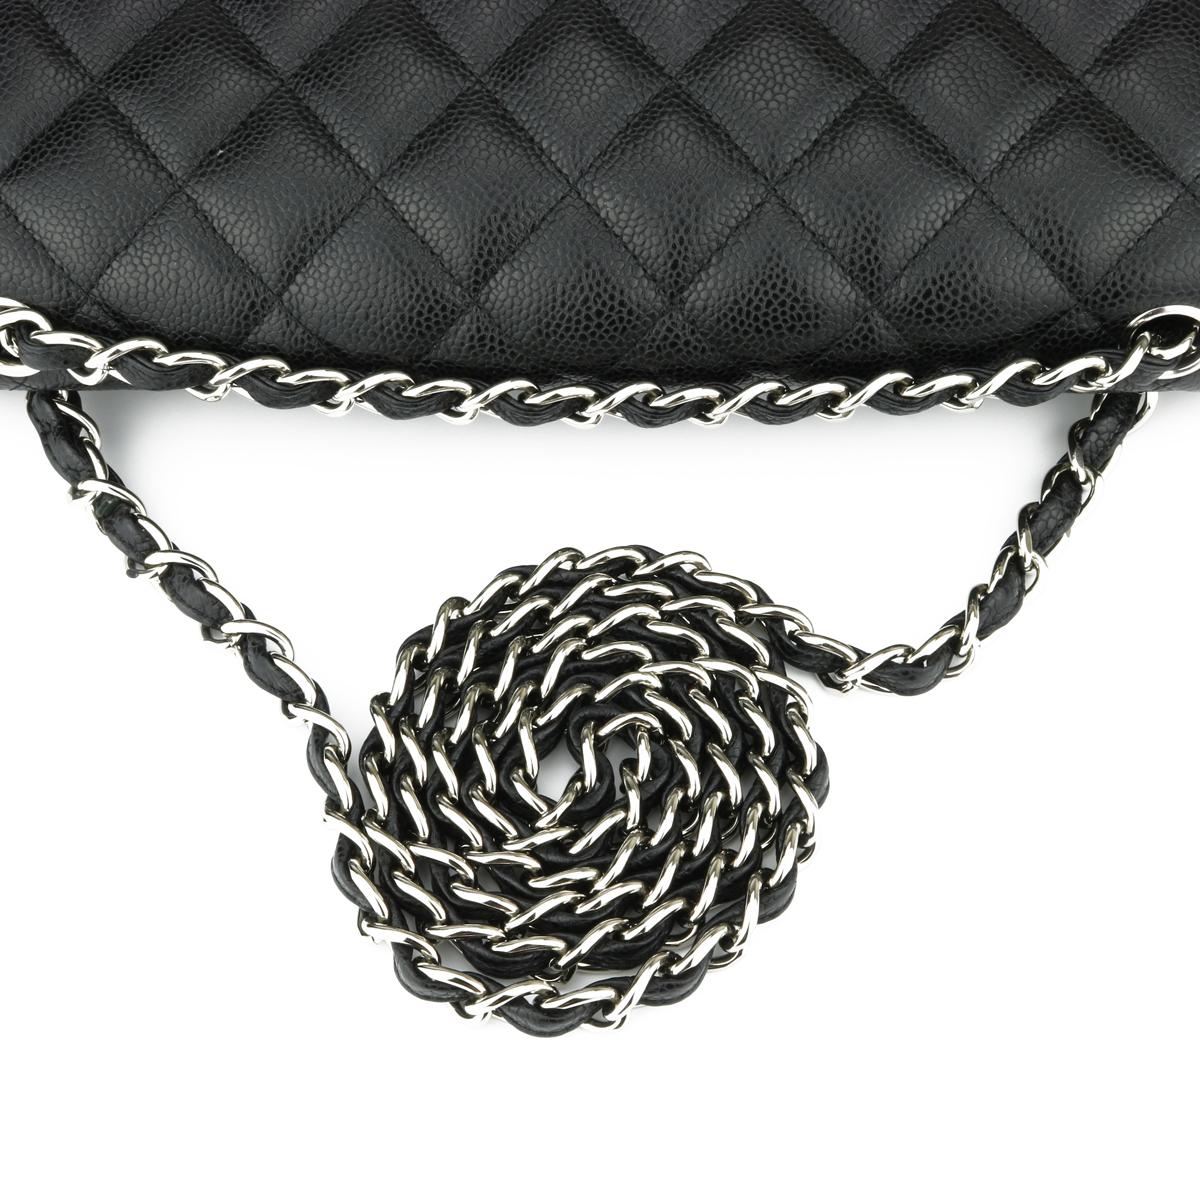 CHANEL Double Flap Jumbo Bag Black Caviar with Silver Hardware 2014 5